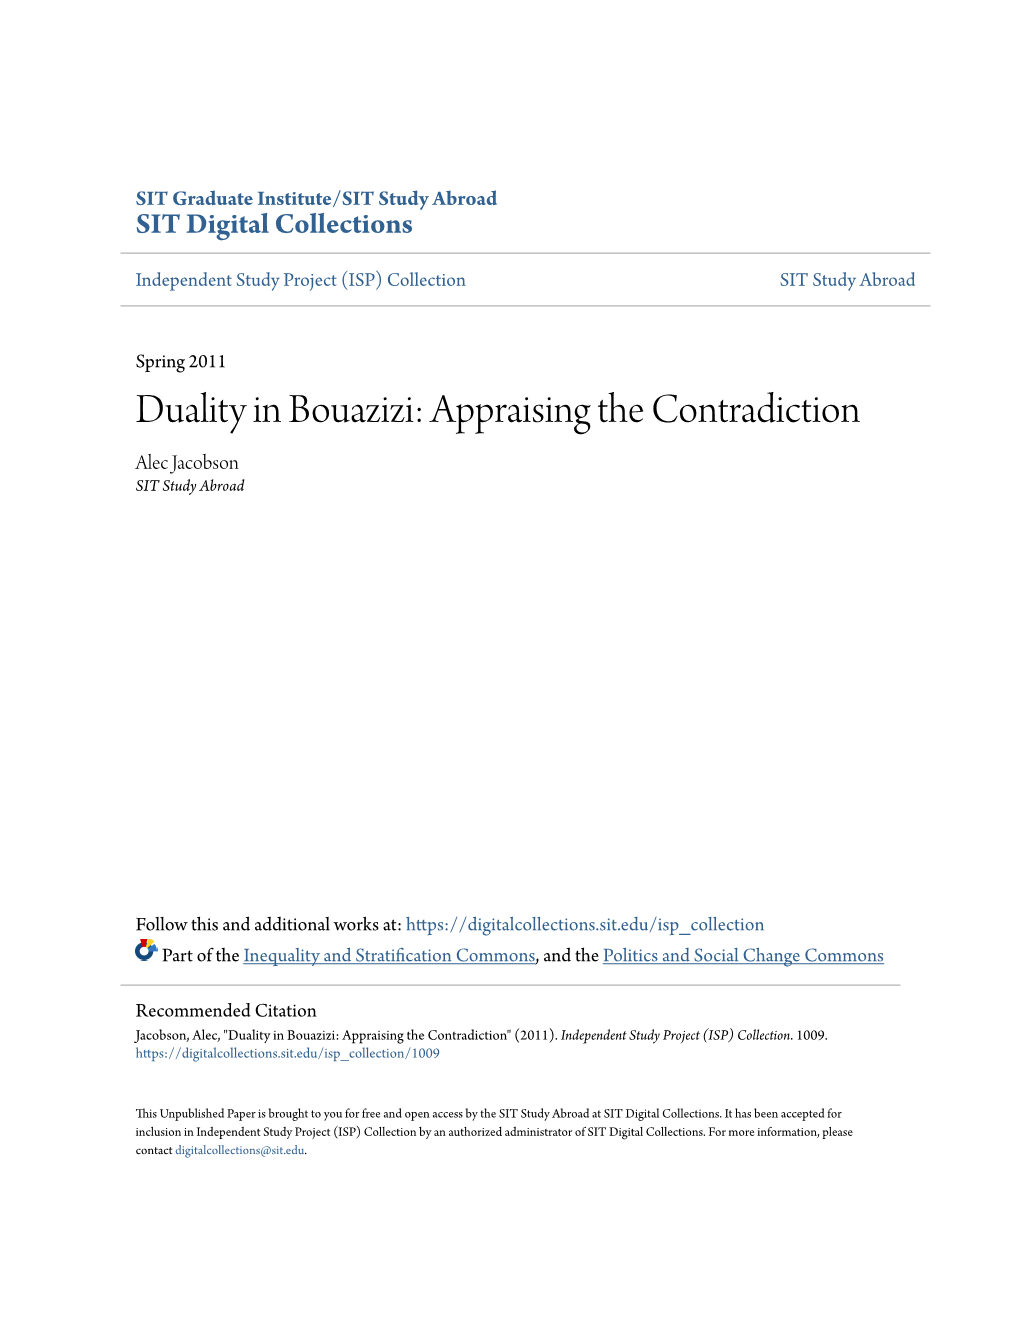 Duality in Bouazizi: Appraising the Contradiction Alec Jacobson SIT Study Abroad